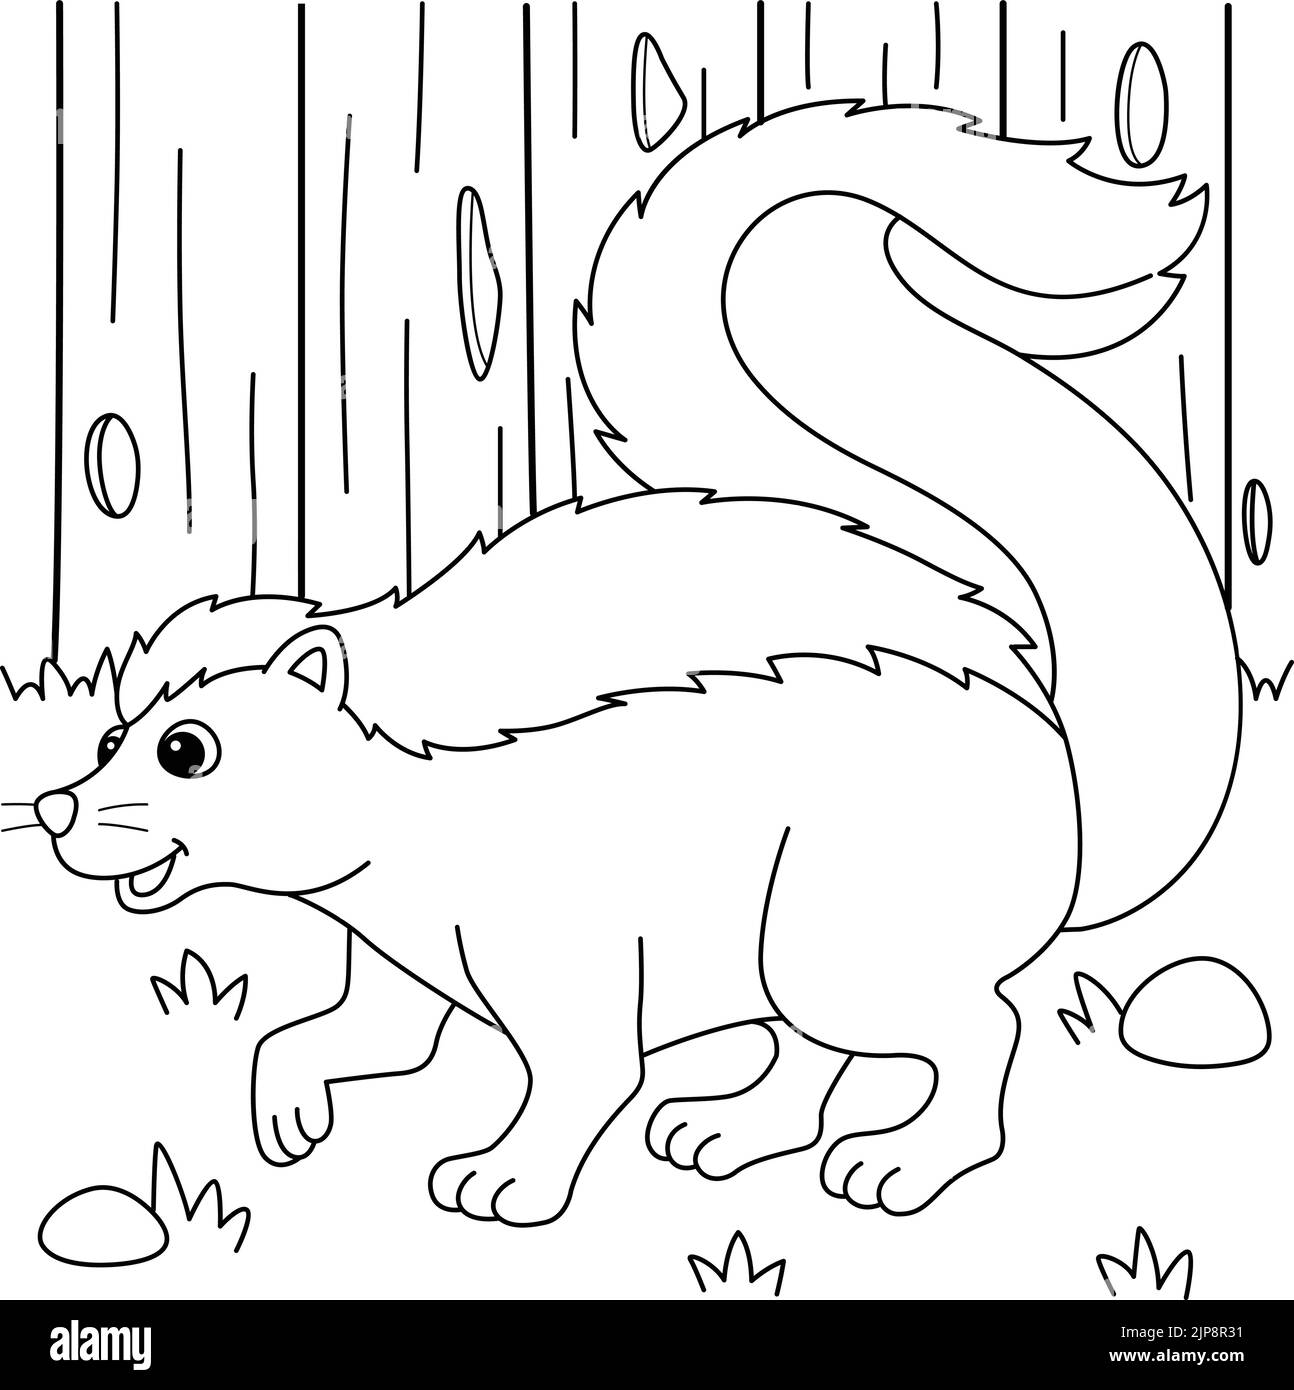 Skunk Animal Coloring Page for Kids Stock Vector